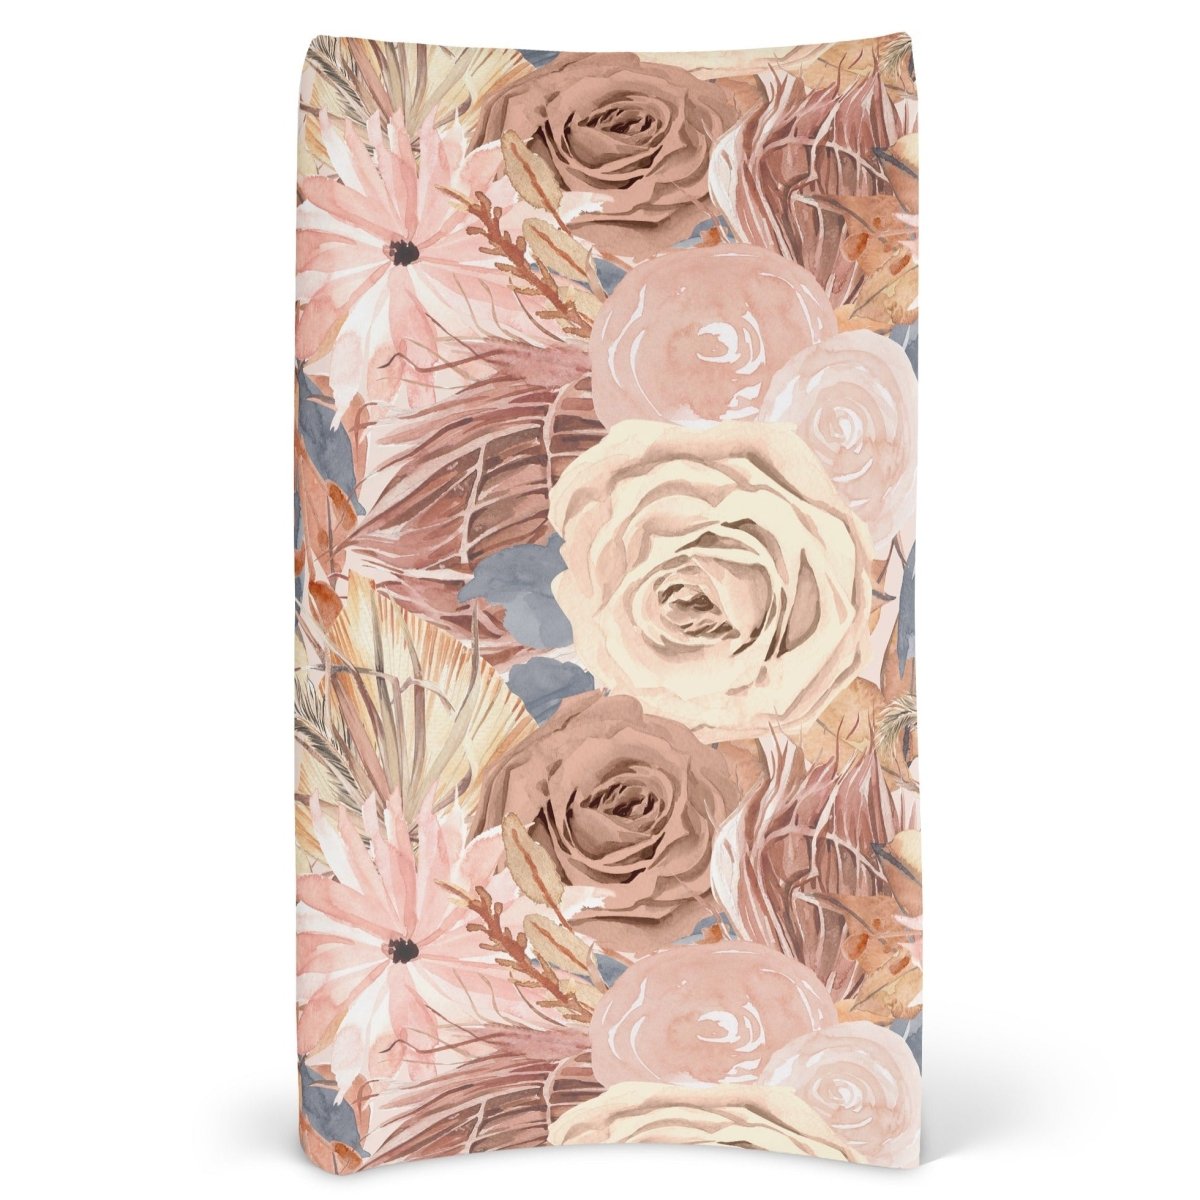 Soft Boho Large Floral Changing Pad Cover - gender_girl, Theme_Boho, Theme_Floral